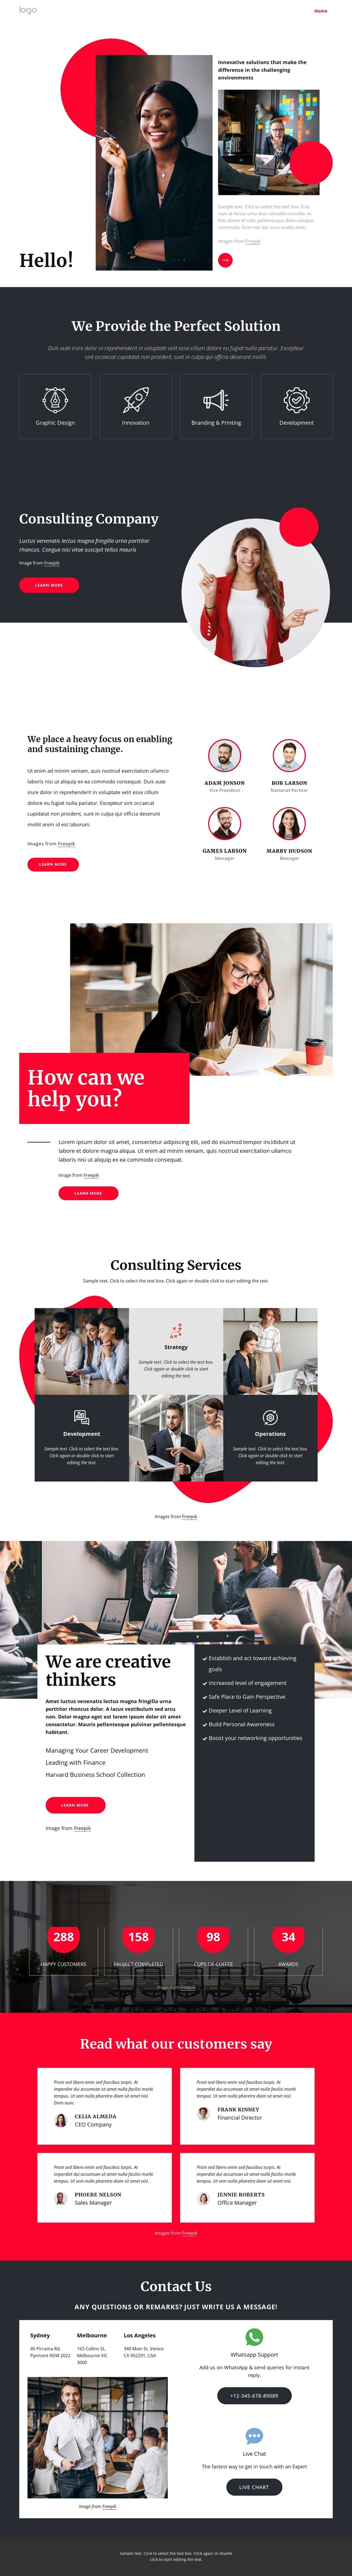 Consulting company NYC Website Builder Software